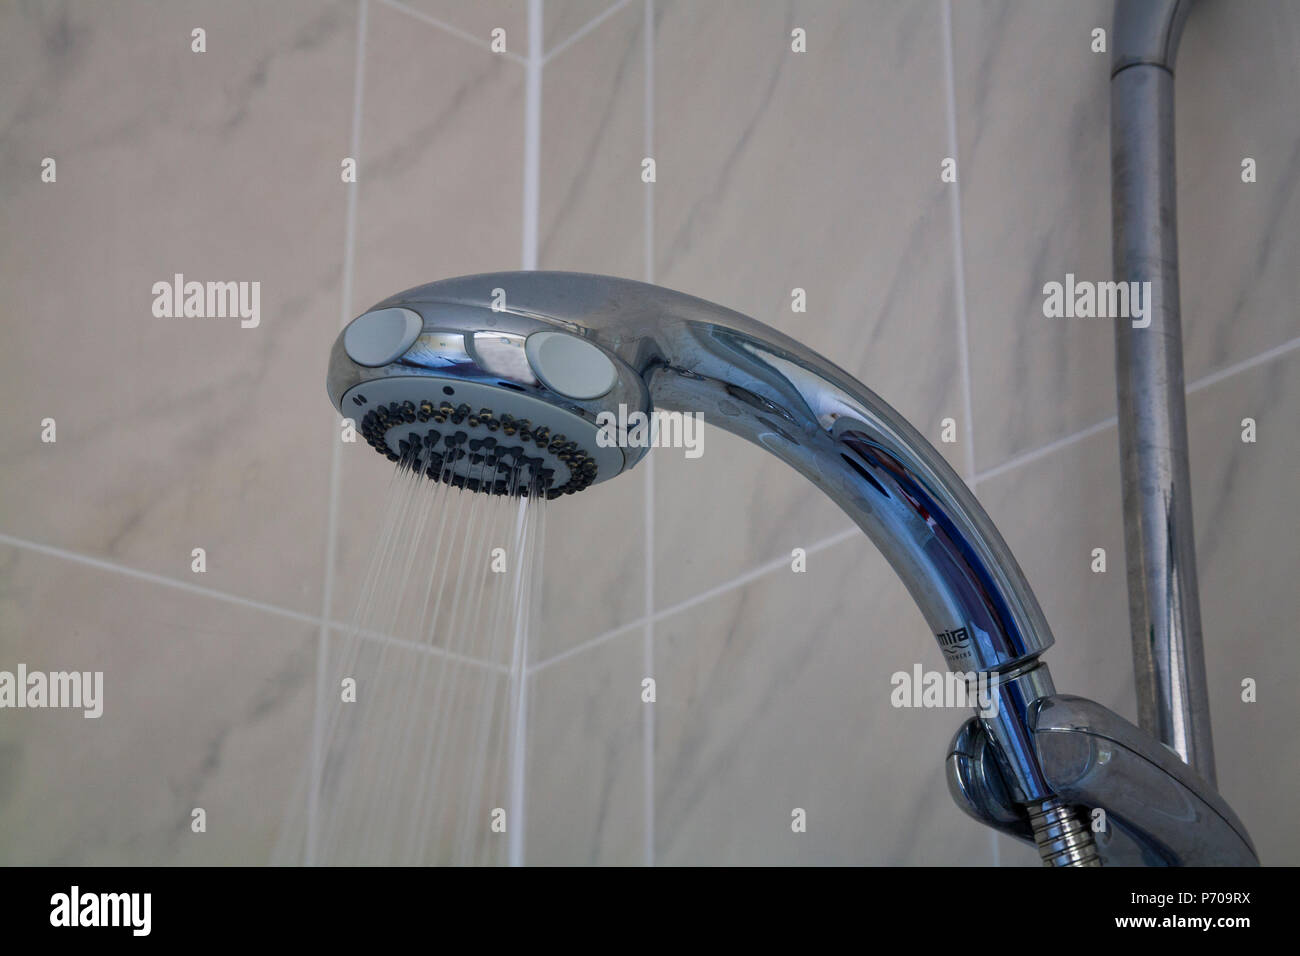 Shower head set on Eco setting to reduce metered water during period of water shortage Stock Photo